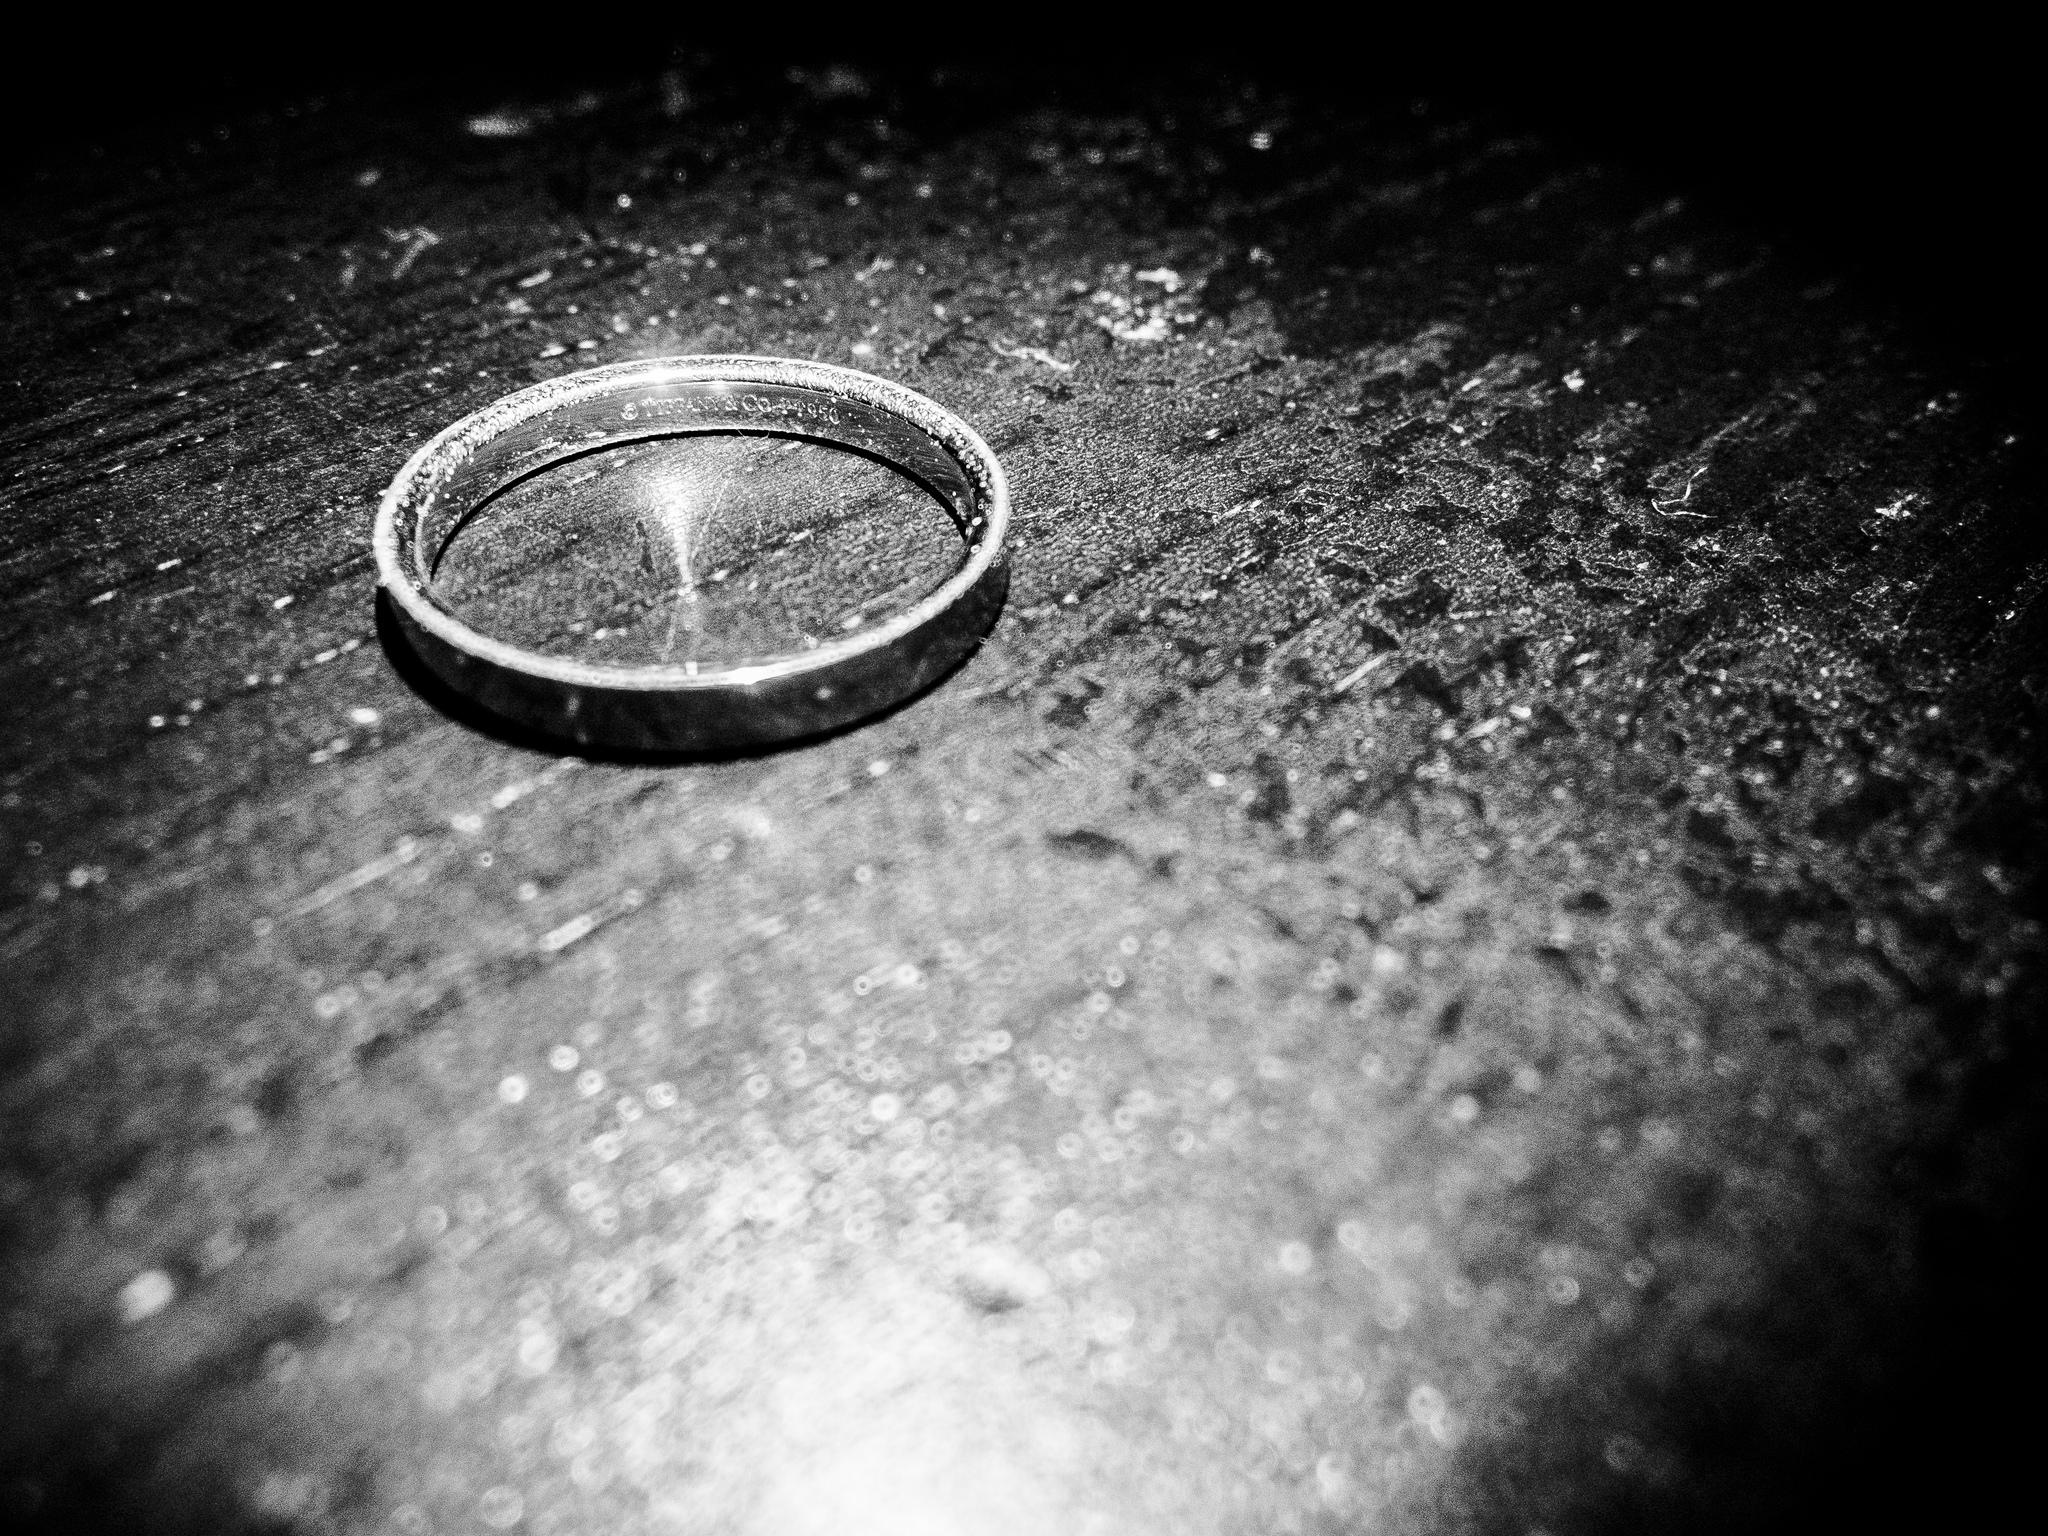 a black-and-white photo of a wedding band on a table